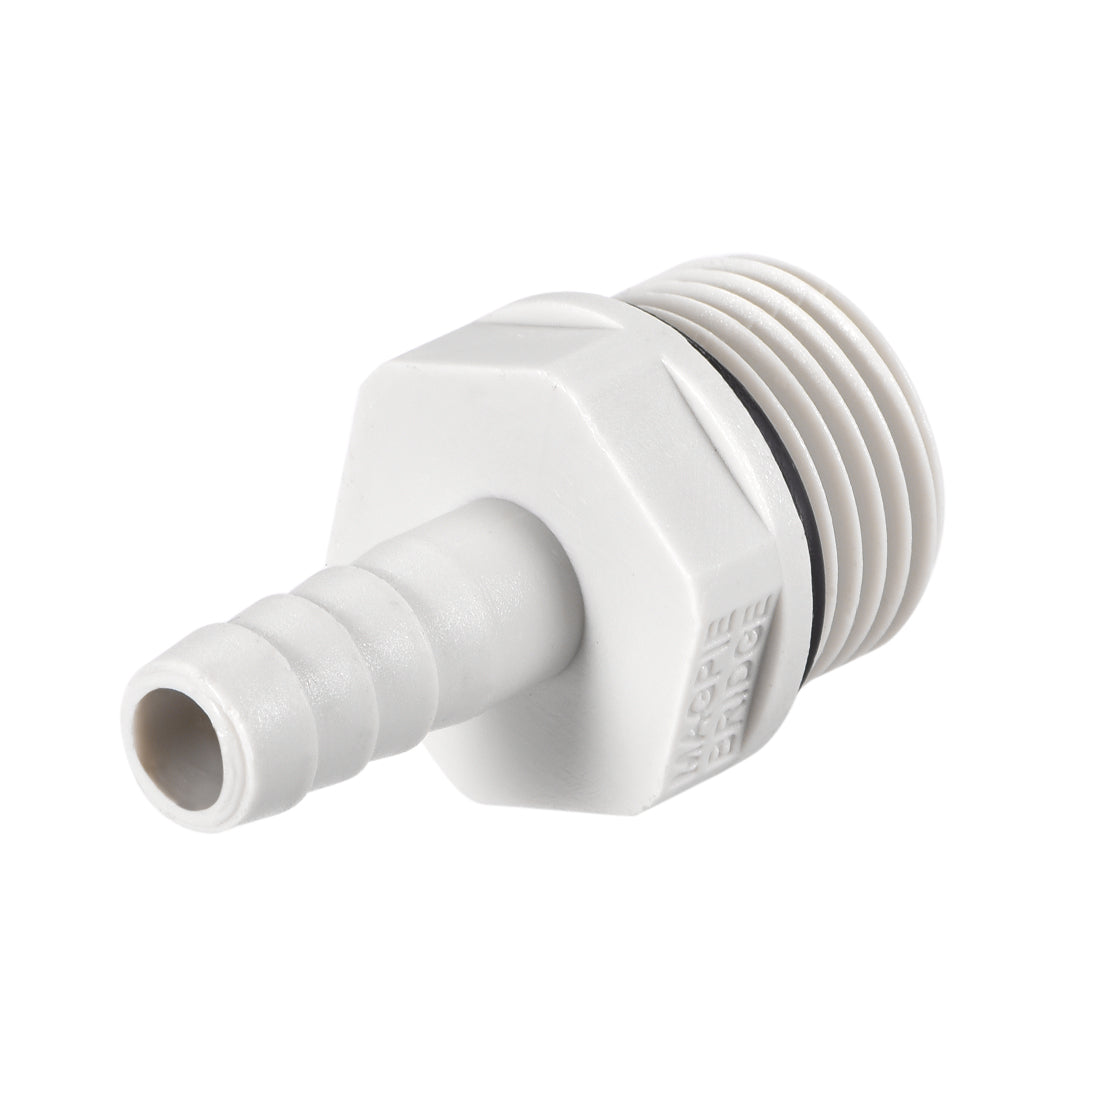 Uxcell Uxcell PVC Barb Hose Fitting Connector Adapter 10mm or 25/64" Barbed x 1/2" G Male Pipe 10pcs